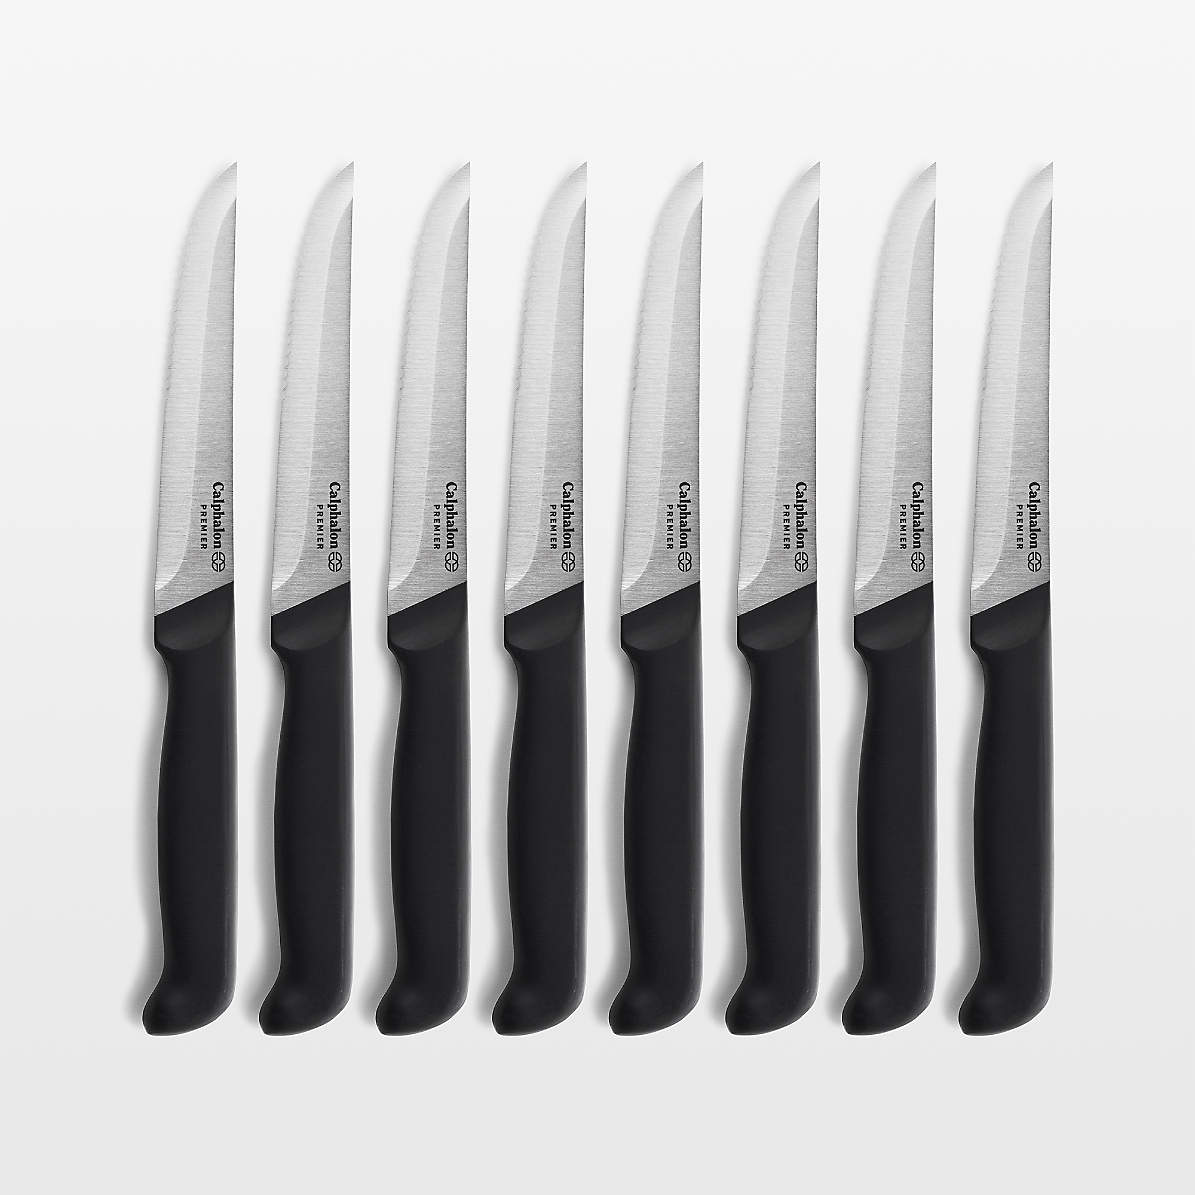 Chophouse Steak Knives - 8 pieces – Certified Angus Beef